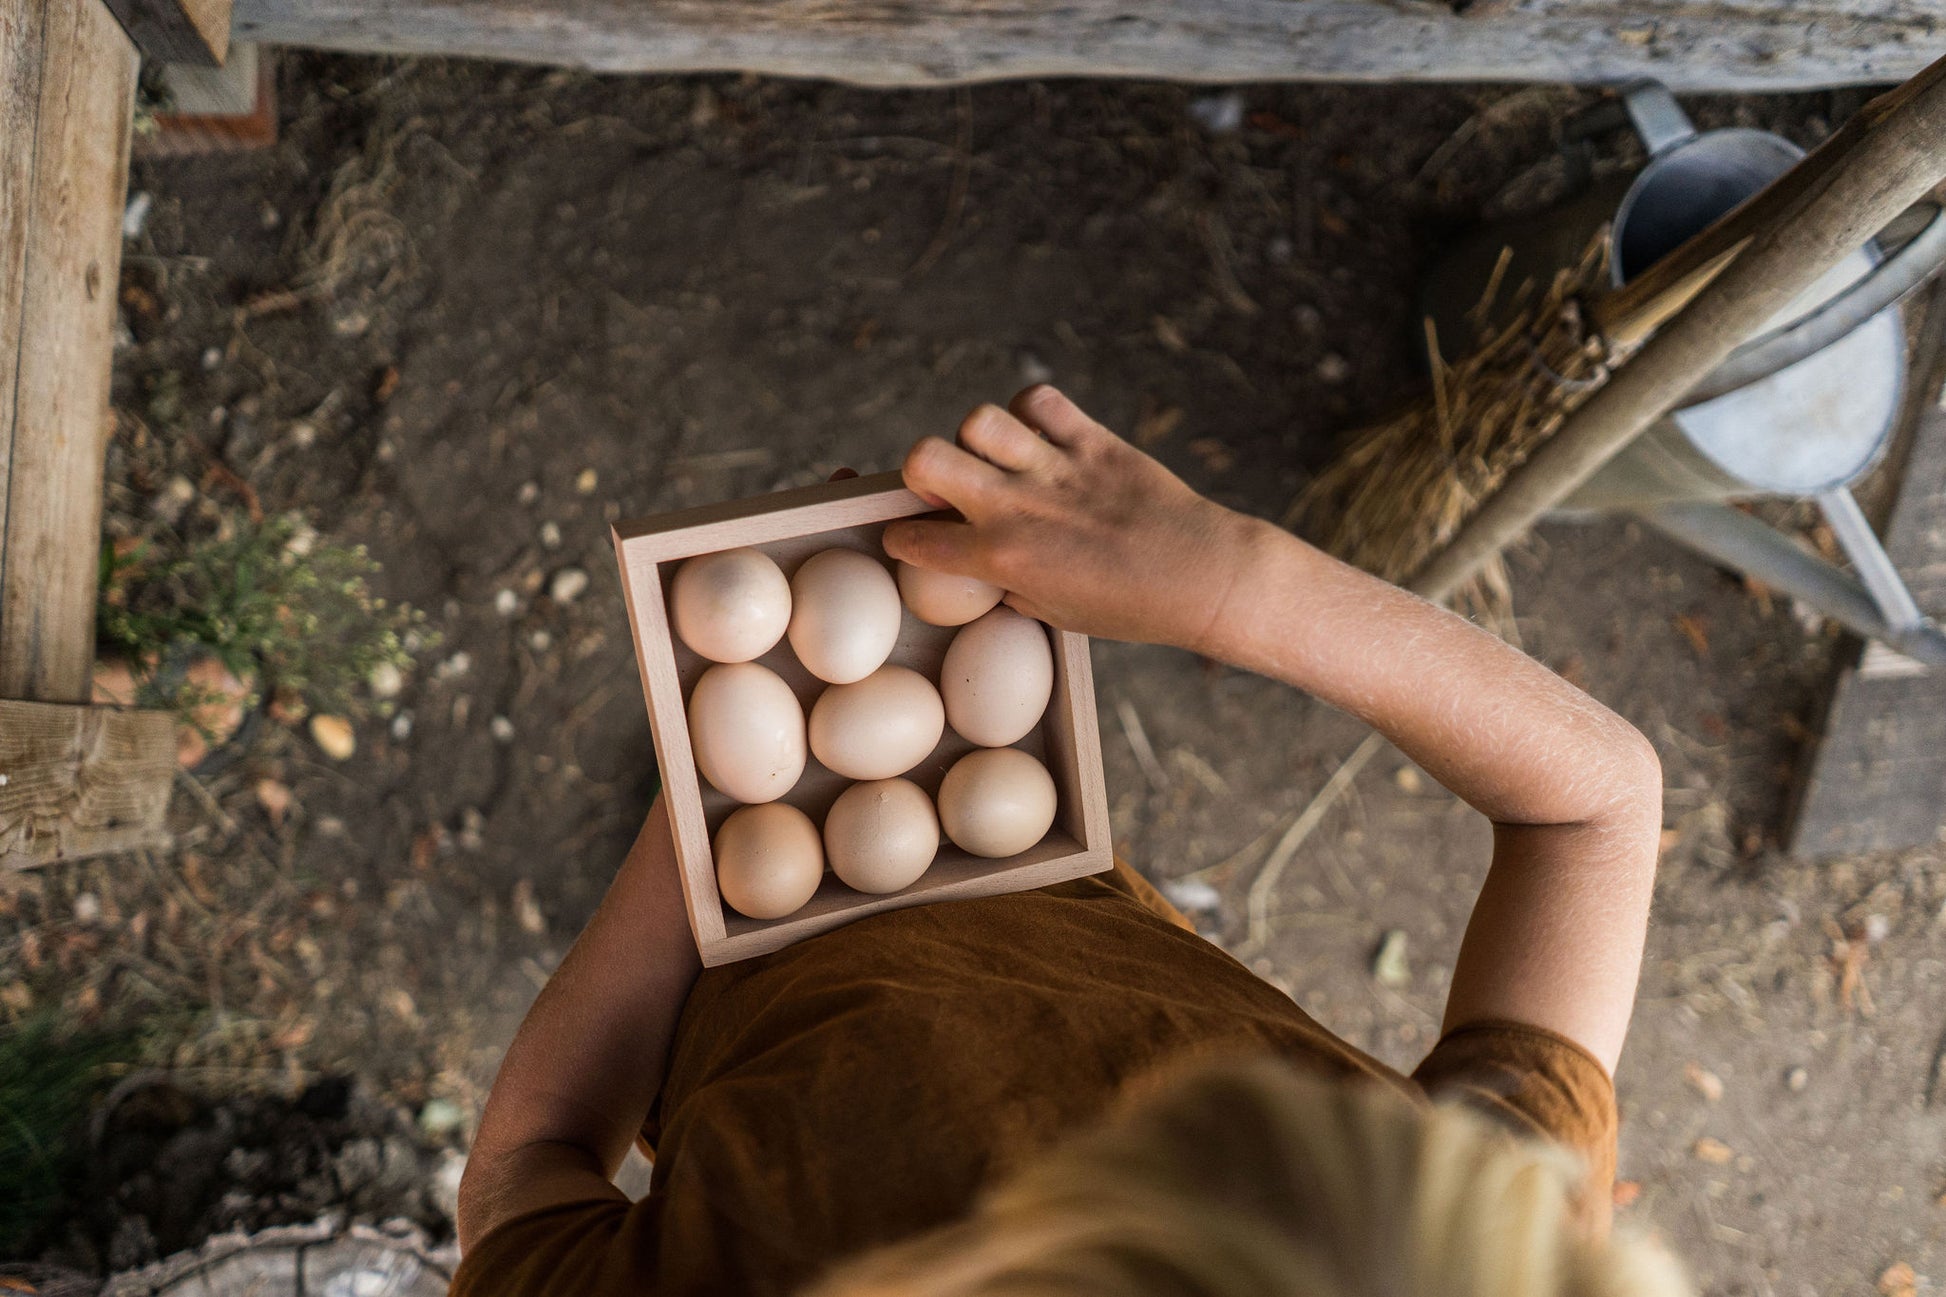 Child holding small storage box filled with eggs